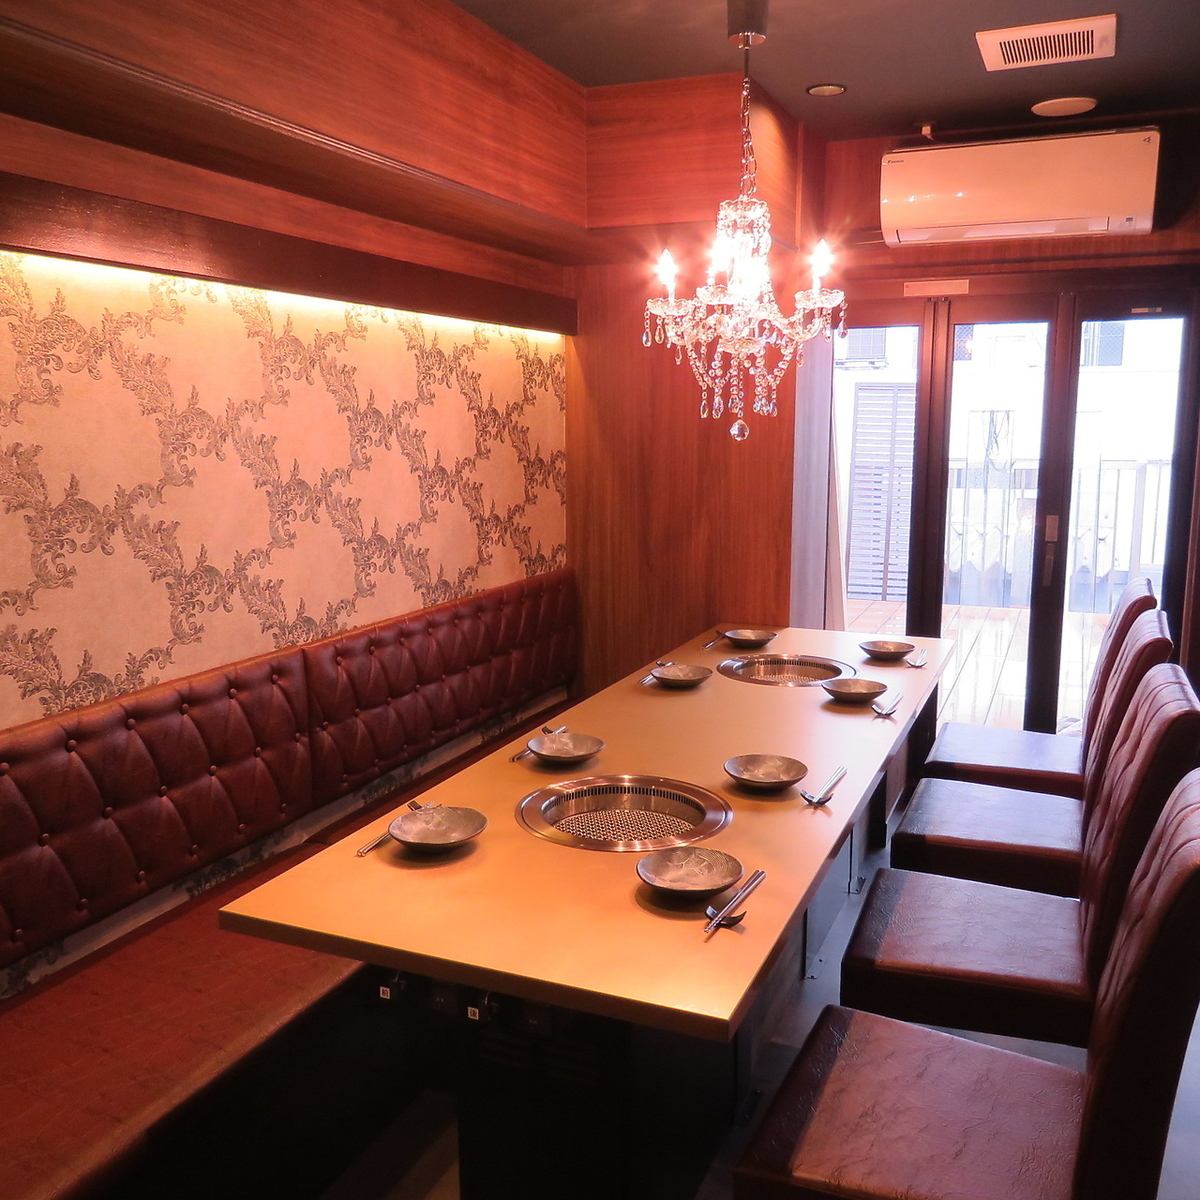 Relaxing luxury yakiniku in a private room ☆ Entertain with high-quality yakiniku from the prefecture ◎